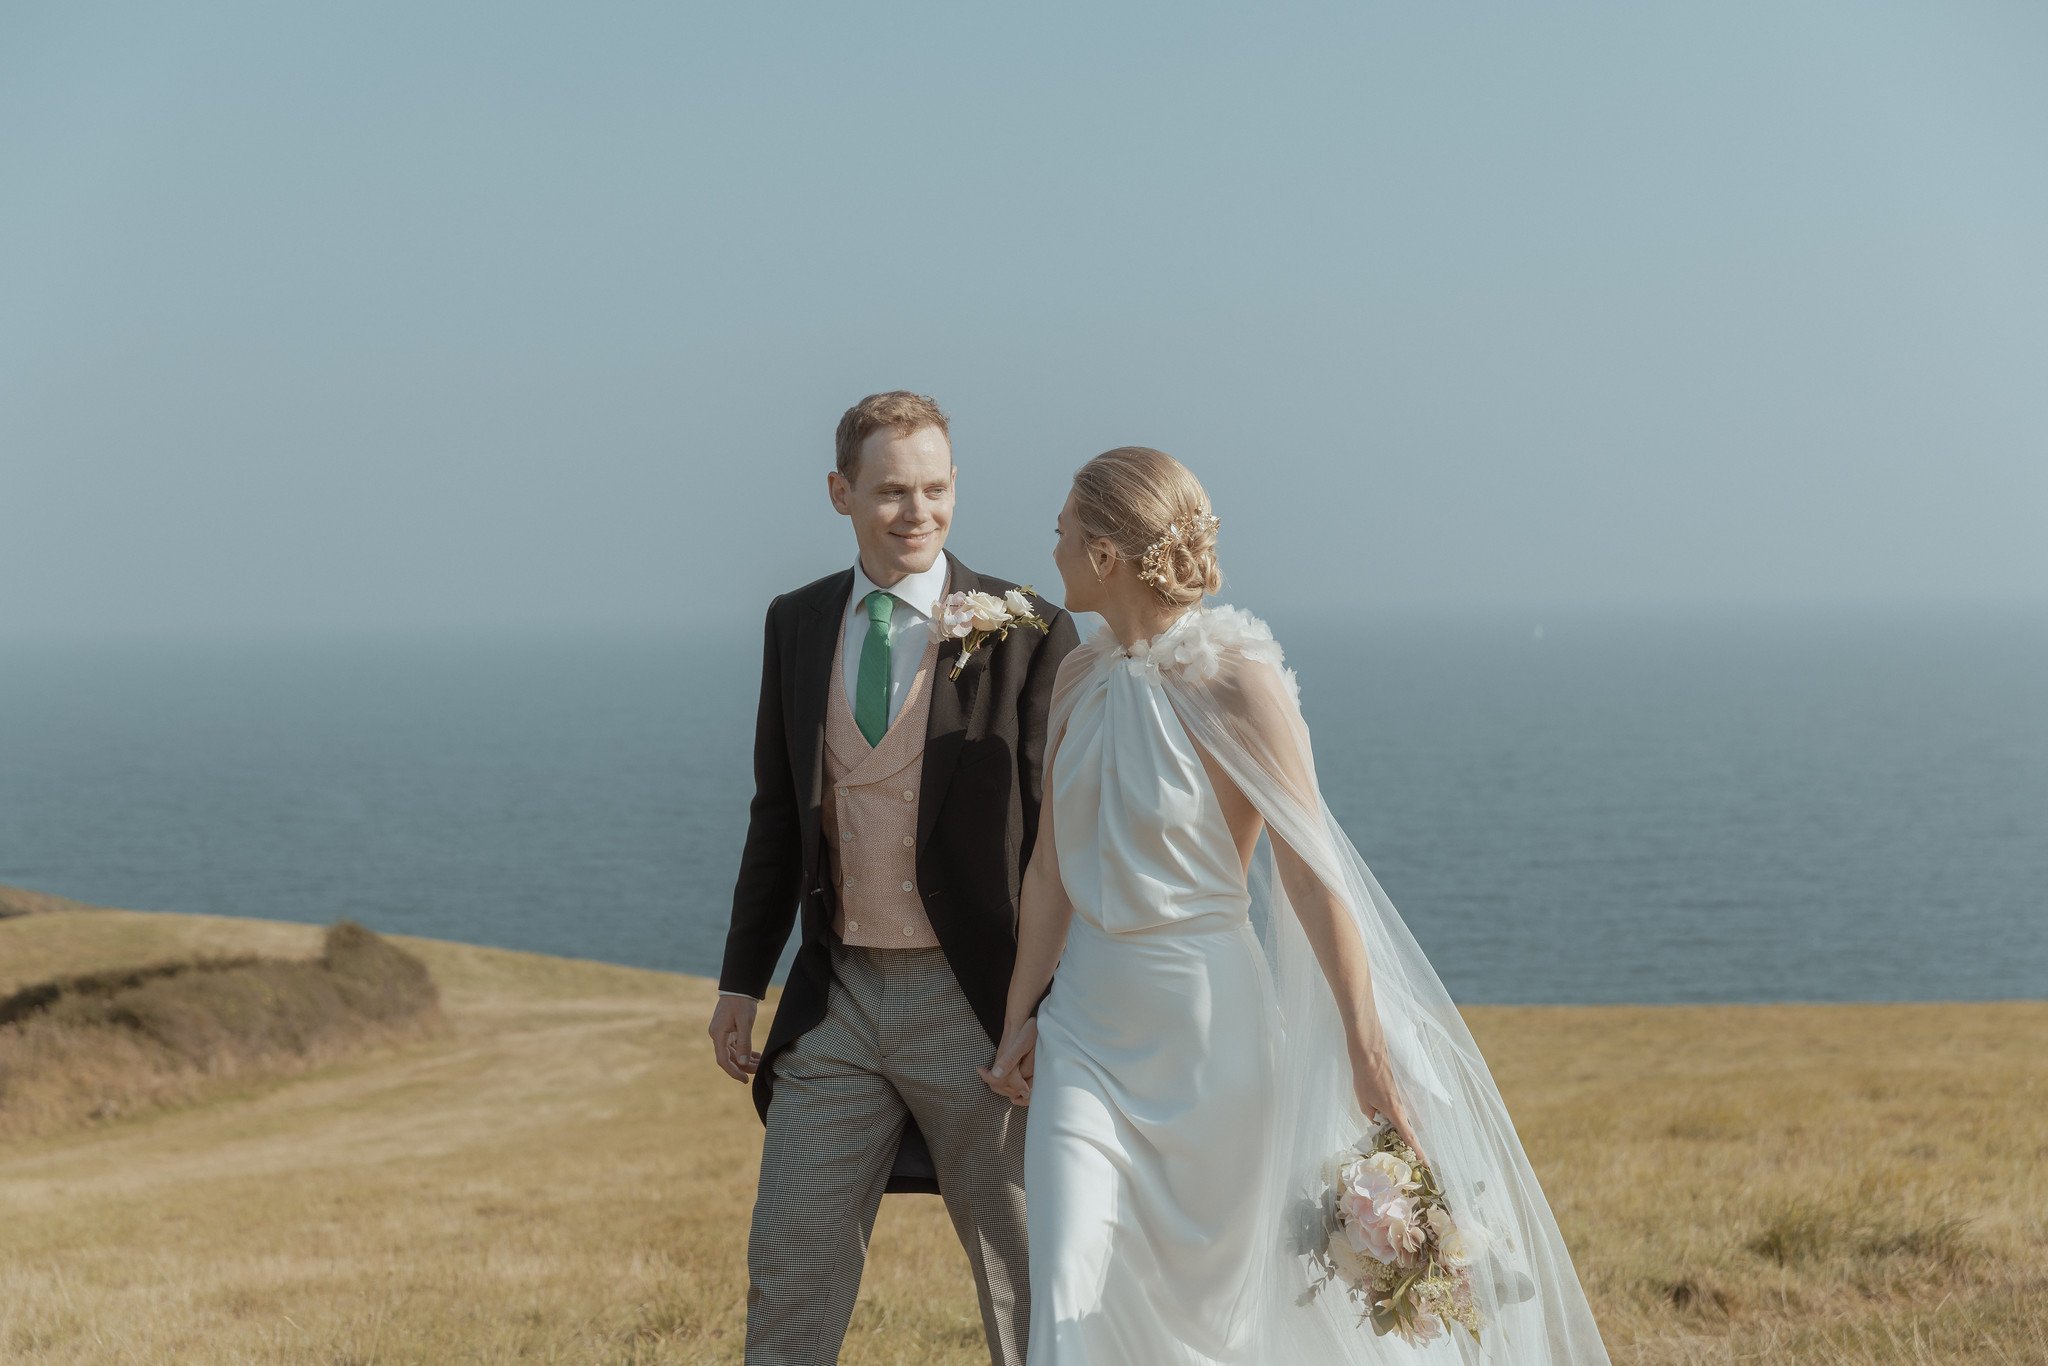 Beautiful bride Rose wore a wedding dress by Halfpenny London